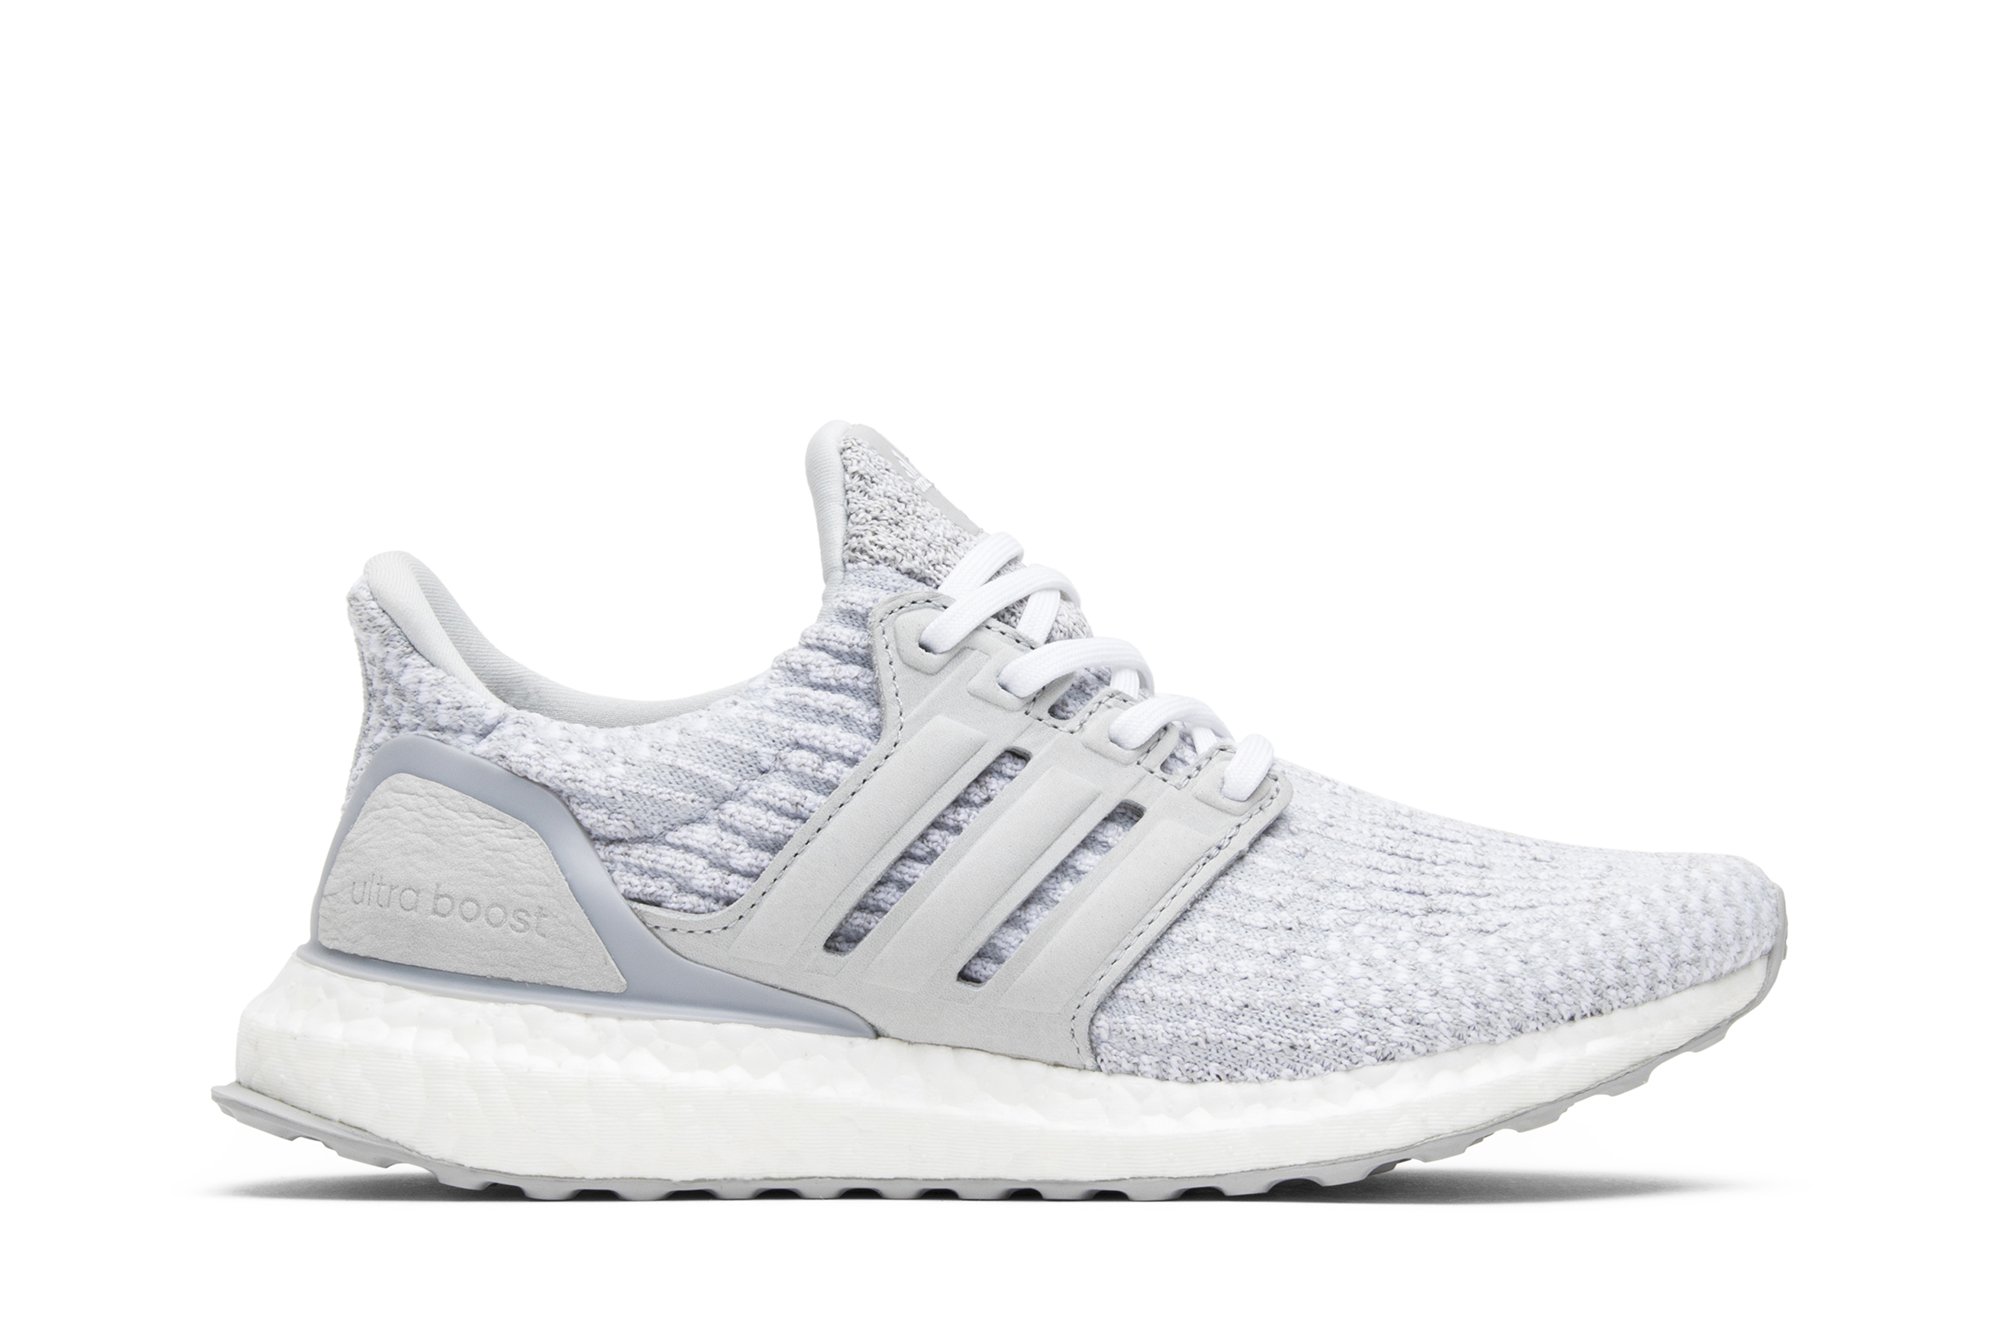 Reigning Champ x UltraBoost 3.0 Limited 'Clear Grey